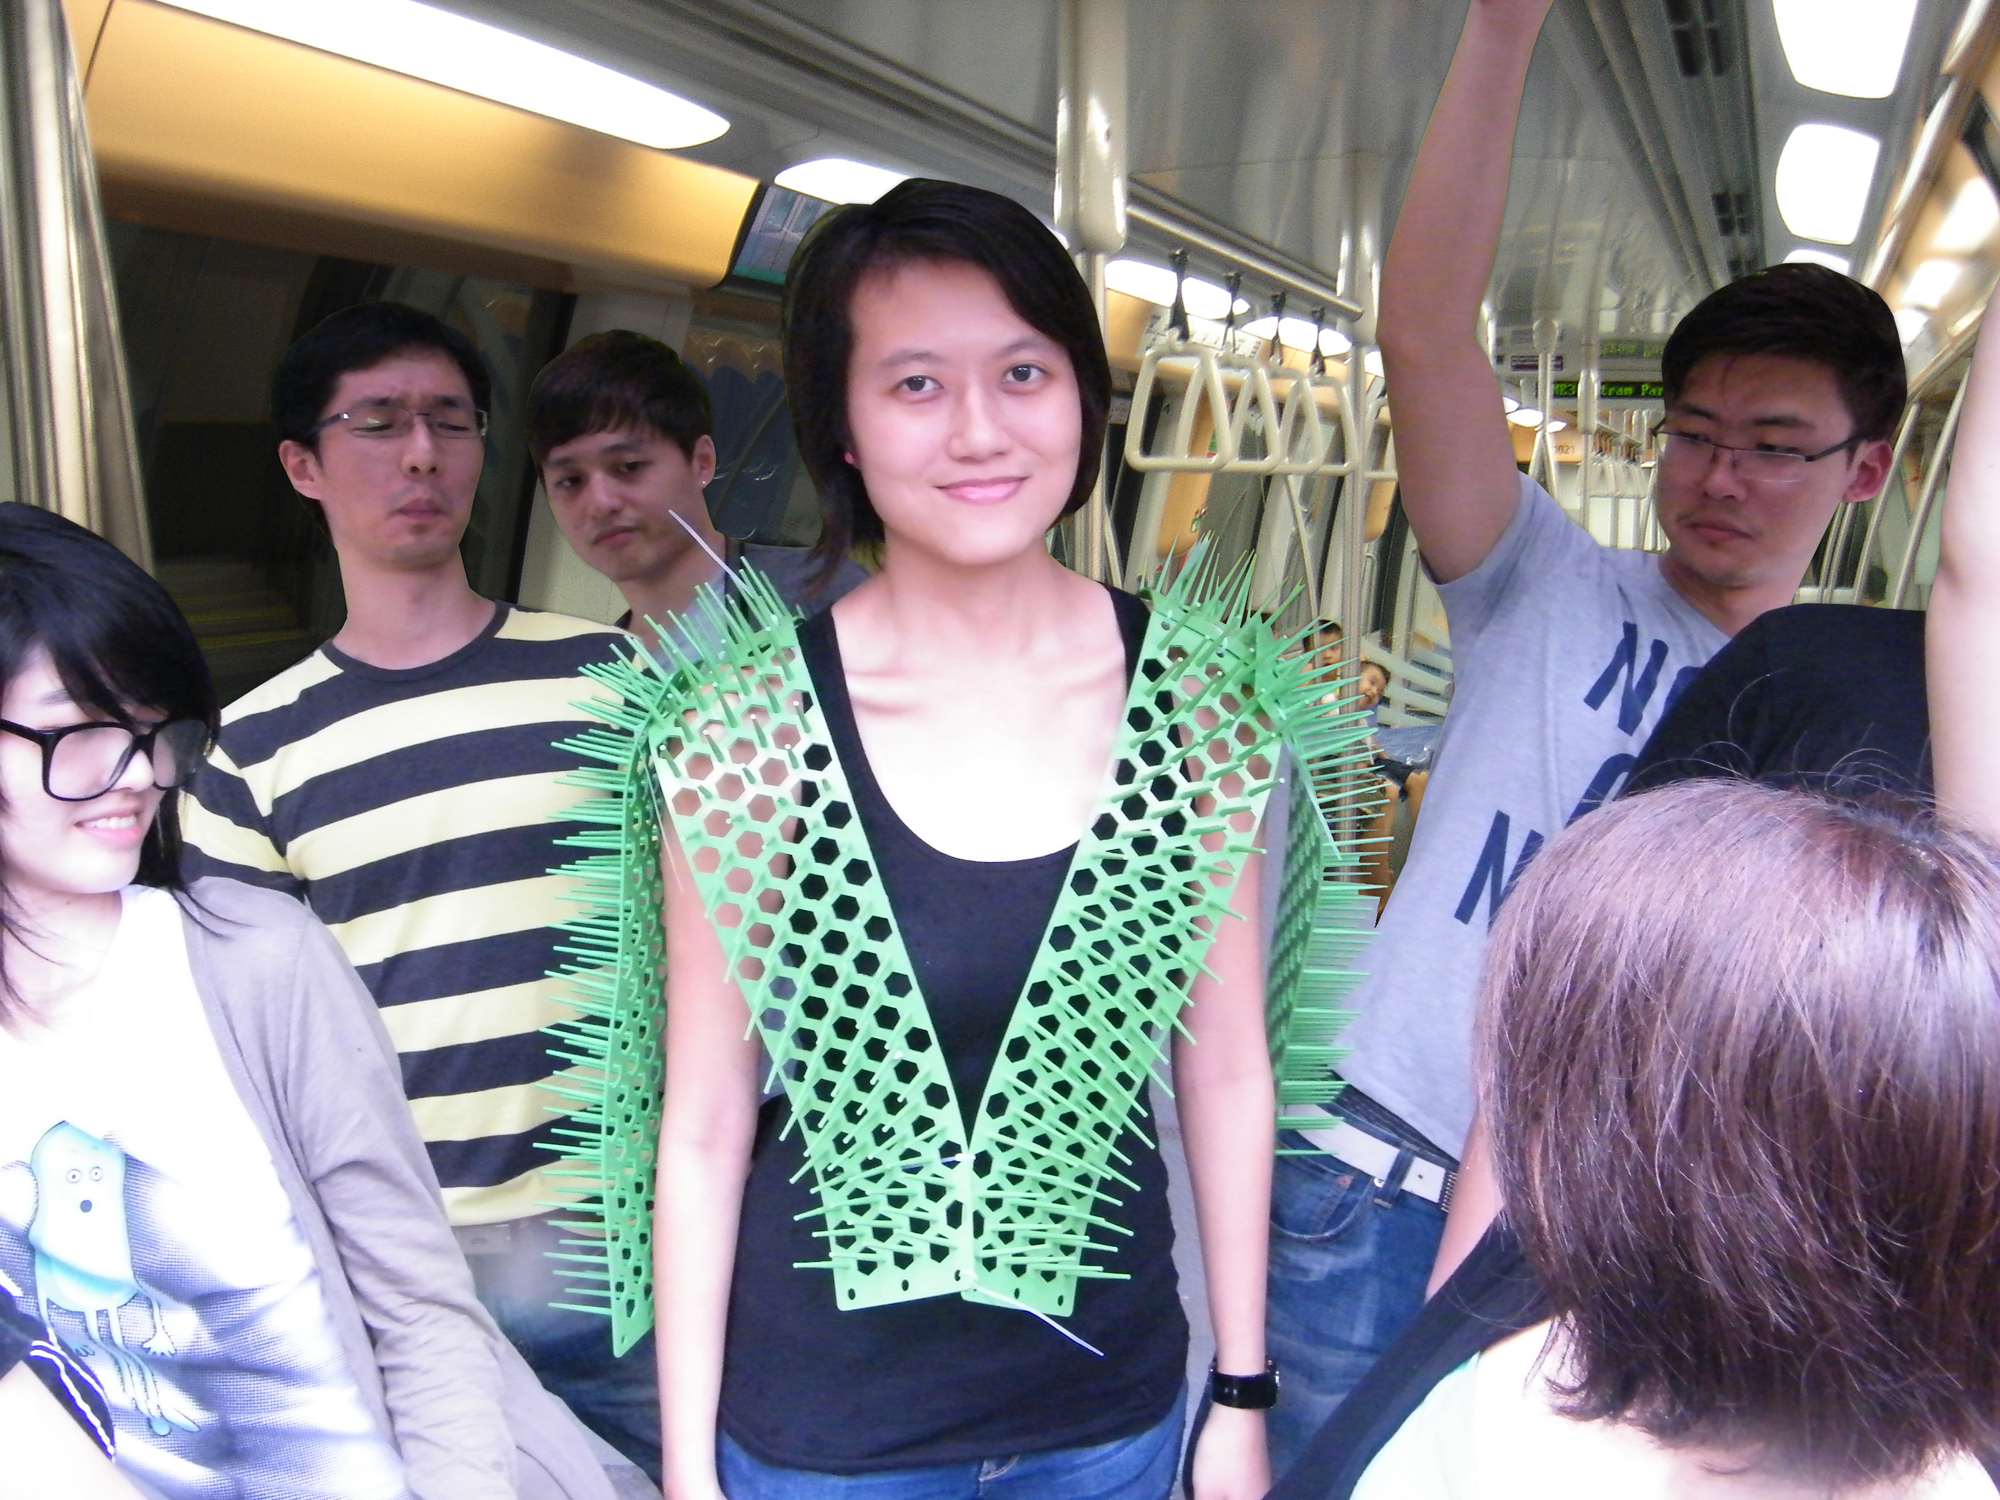 Young woman on a subway wearing several strips of plastic spikes across her chest and back; they protrude perhaps 5" off of her body. A group of people around her keep their distance and make grimacing expressions.